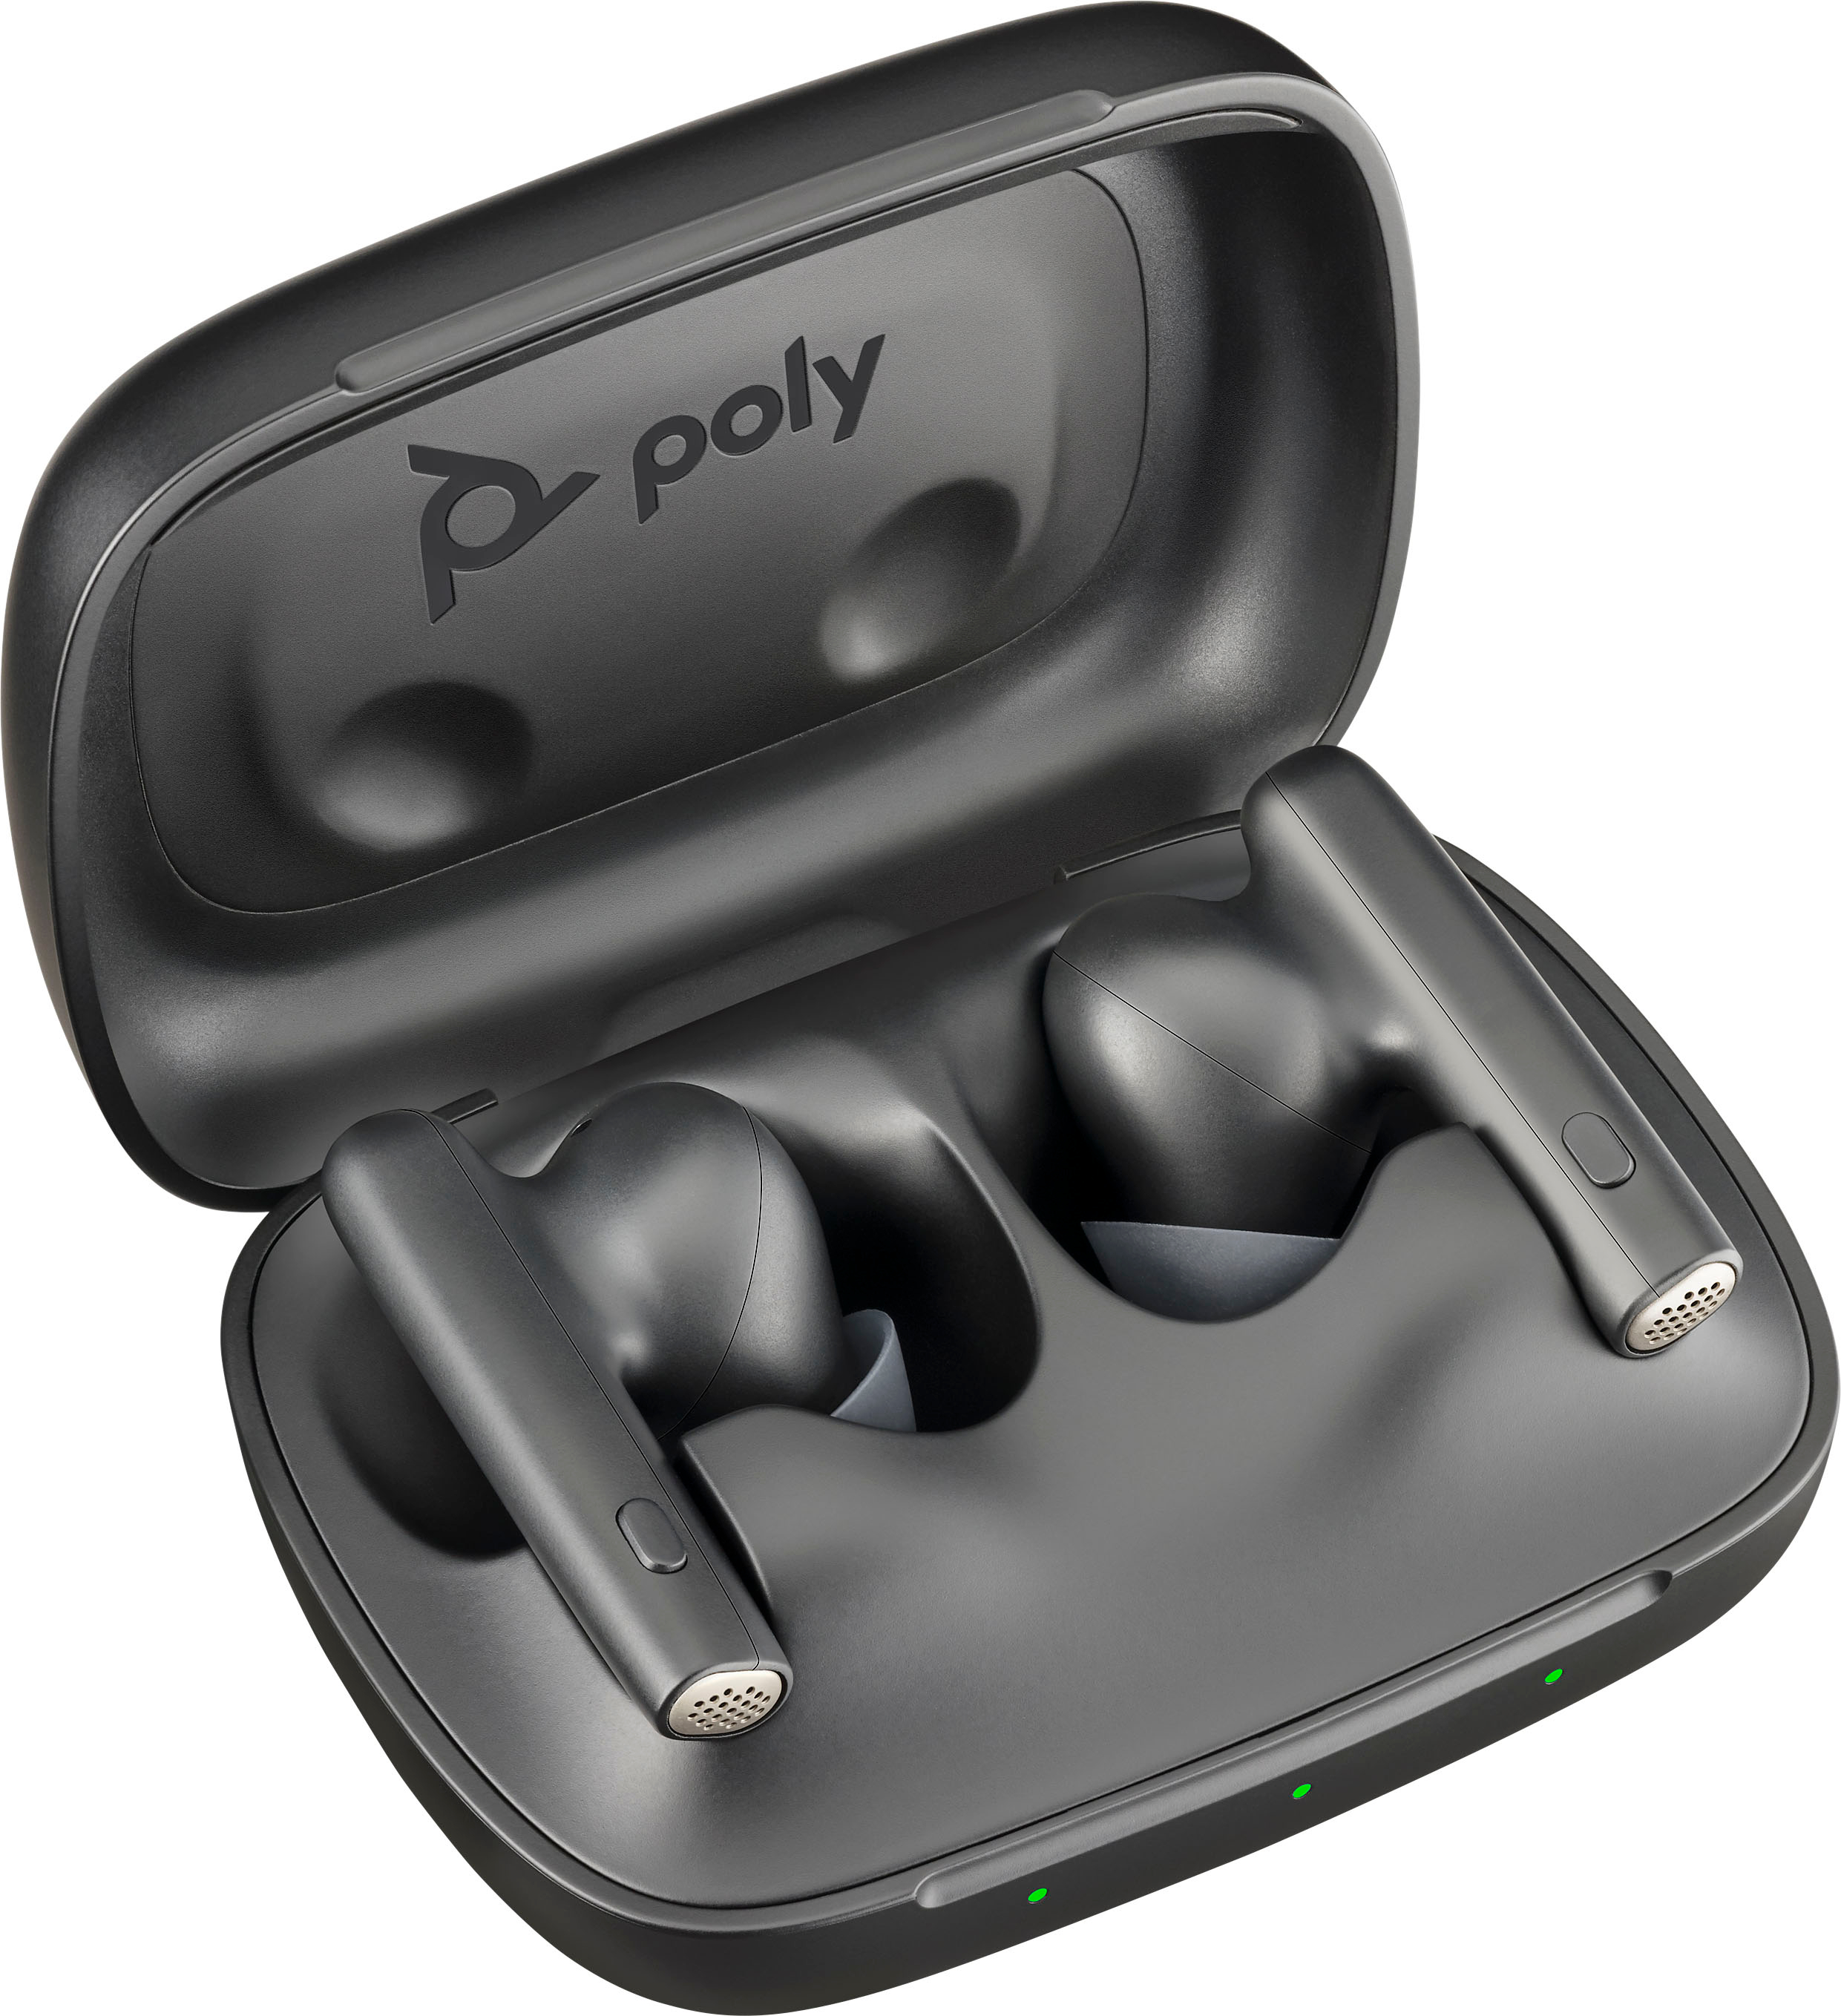 Angle View: Poly - formerly Plantronics - Voyager Free 60 True Wireless Earbuds with Active Noise Canceling - Black